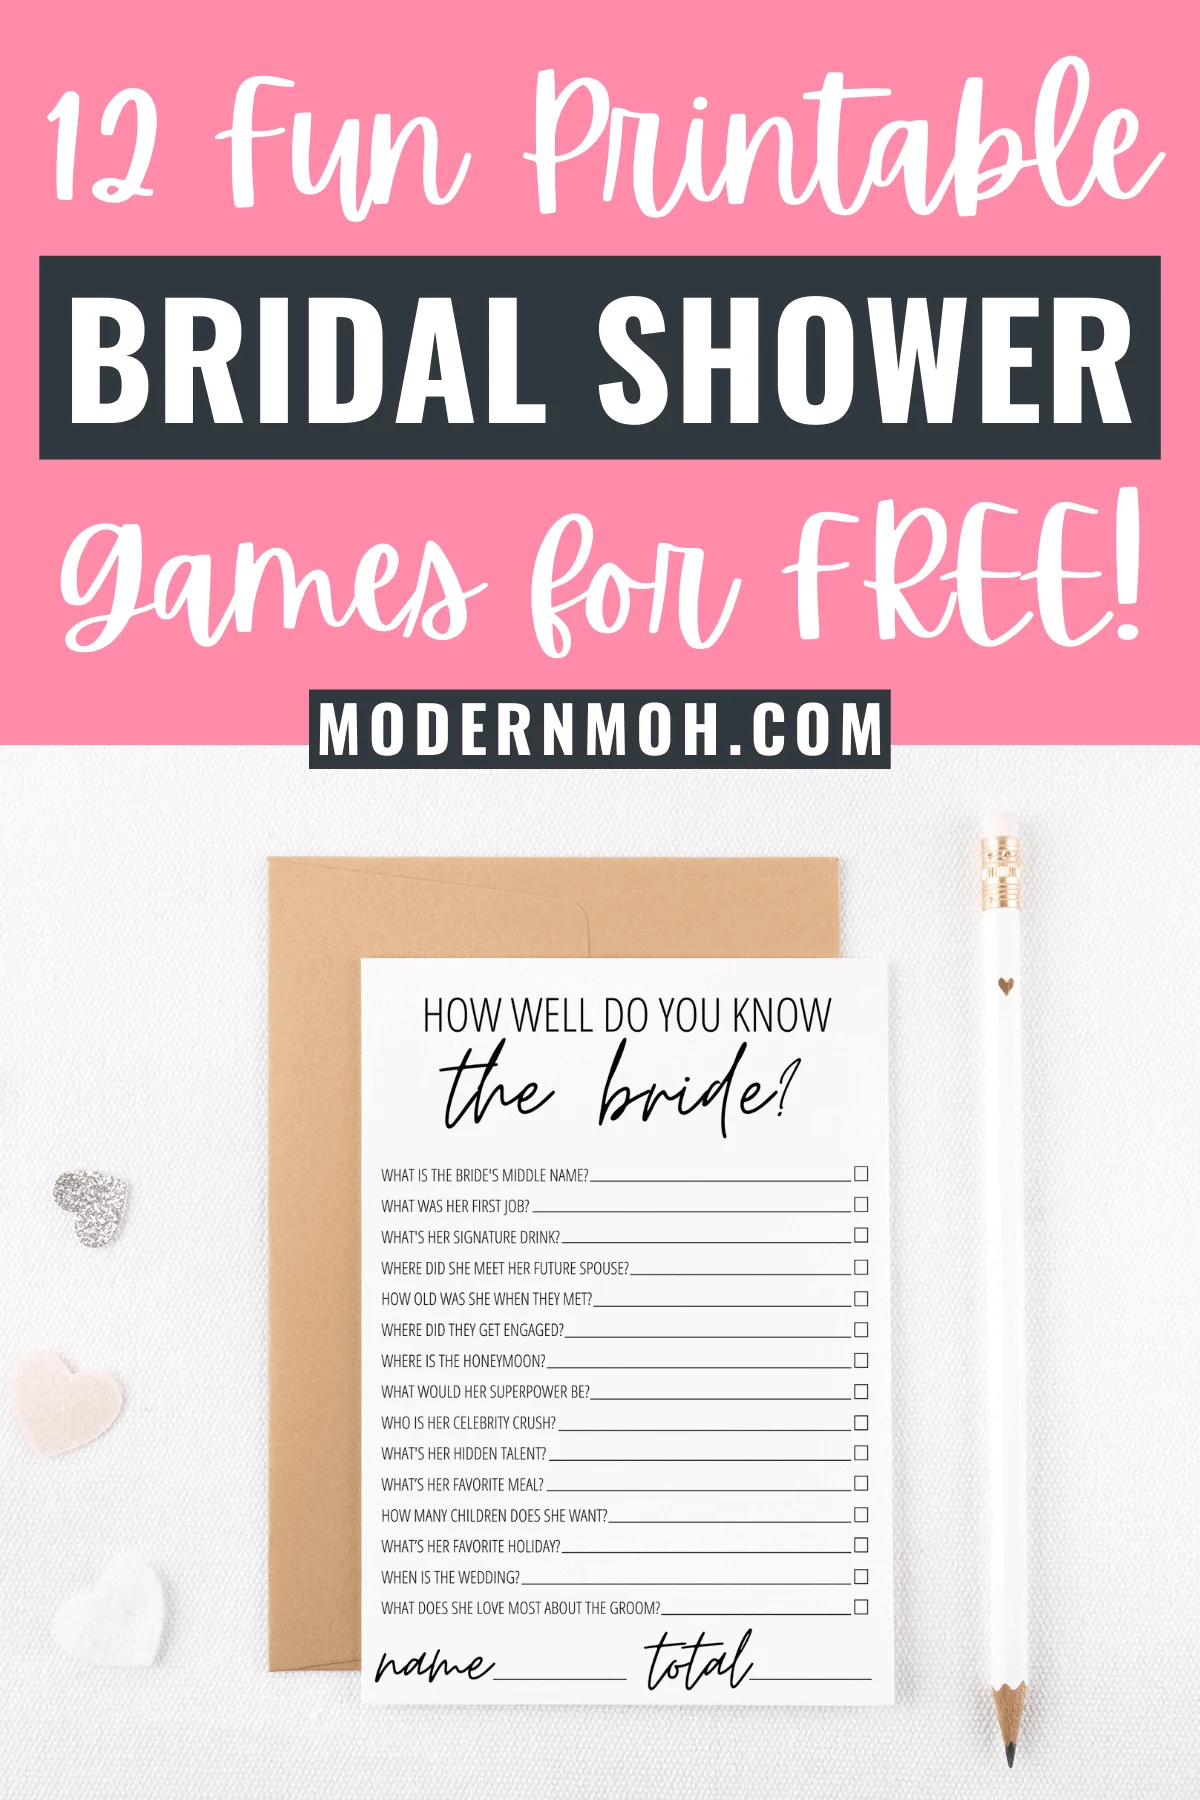 Printable Games Hens Party Bridal Shower Games Floral Print Games PDF Games 12 Printable Bridal Shower Games Bachelorette Party